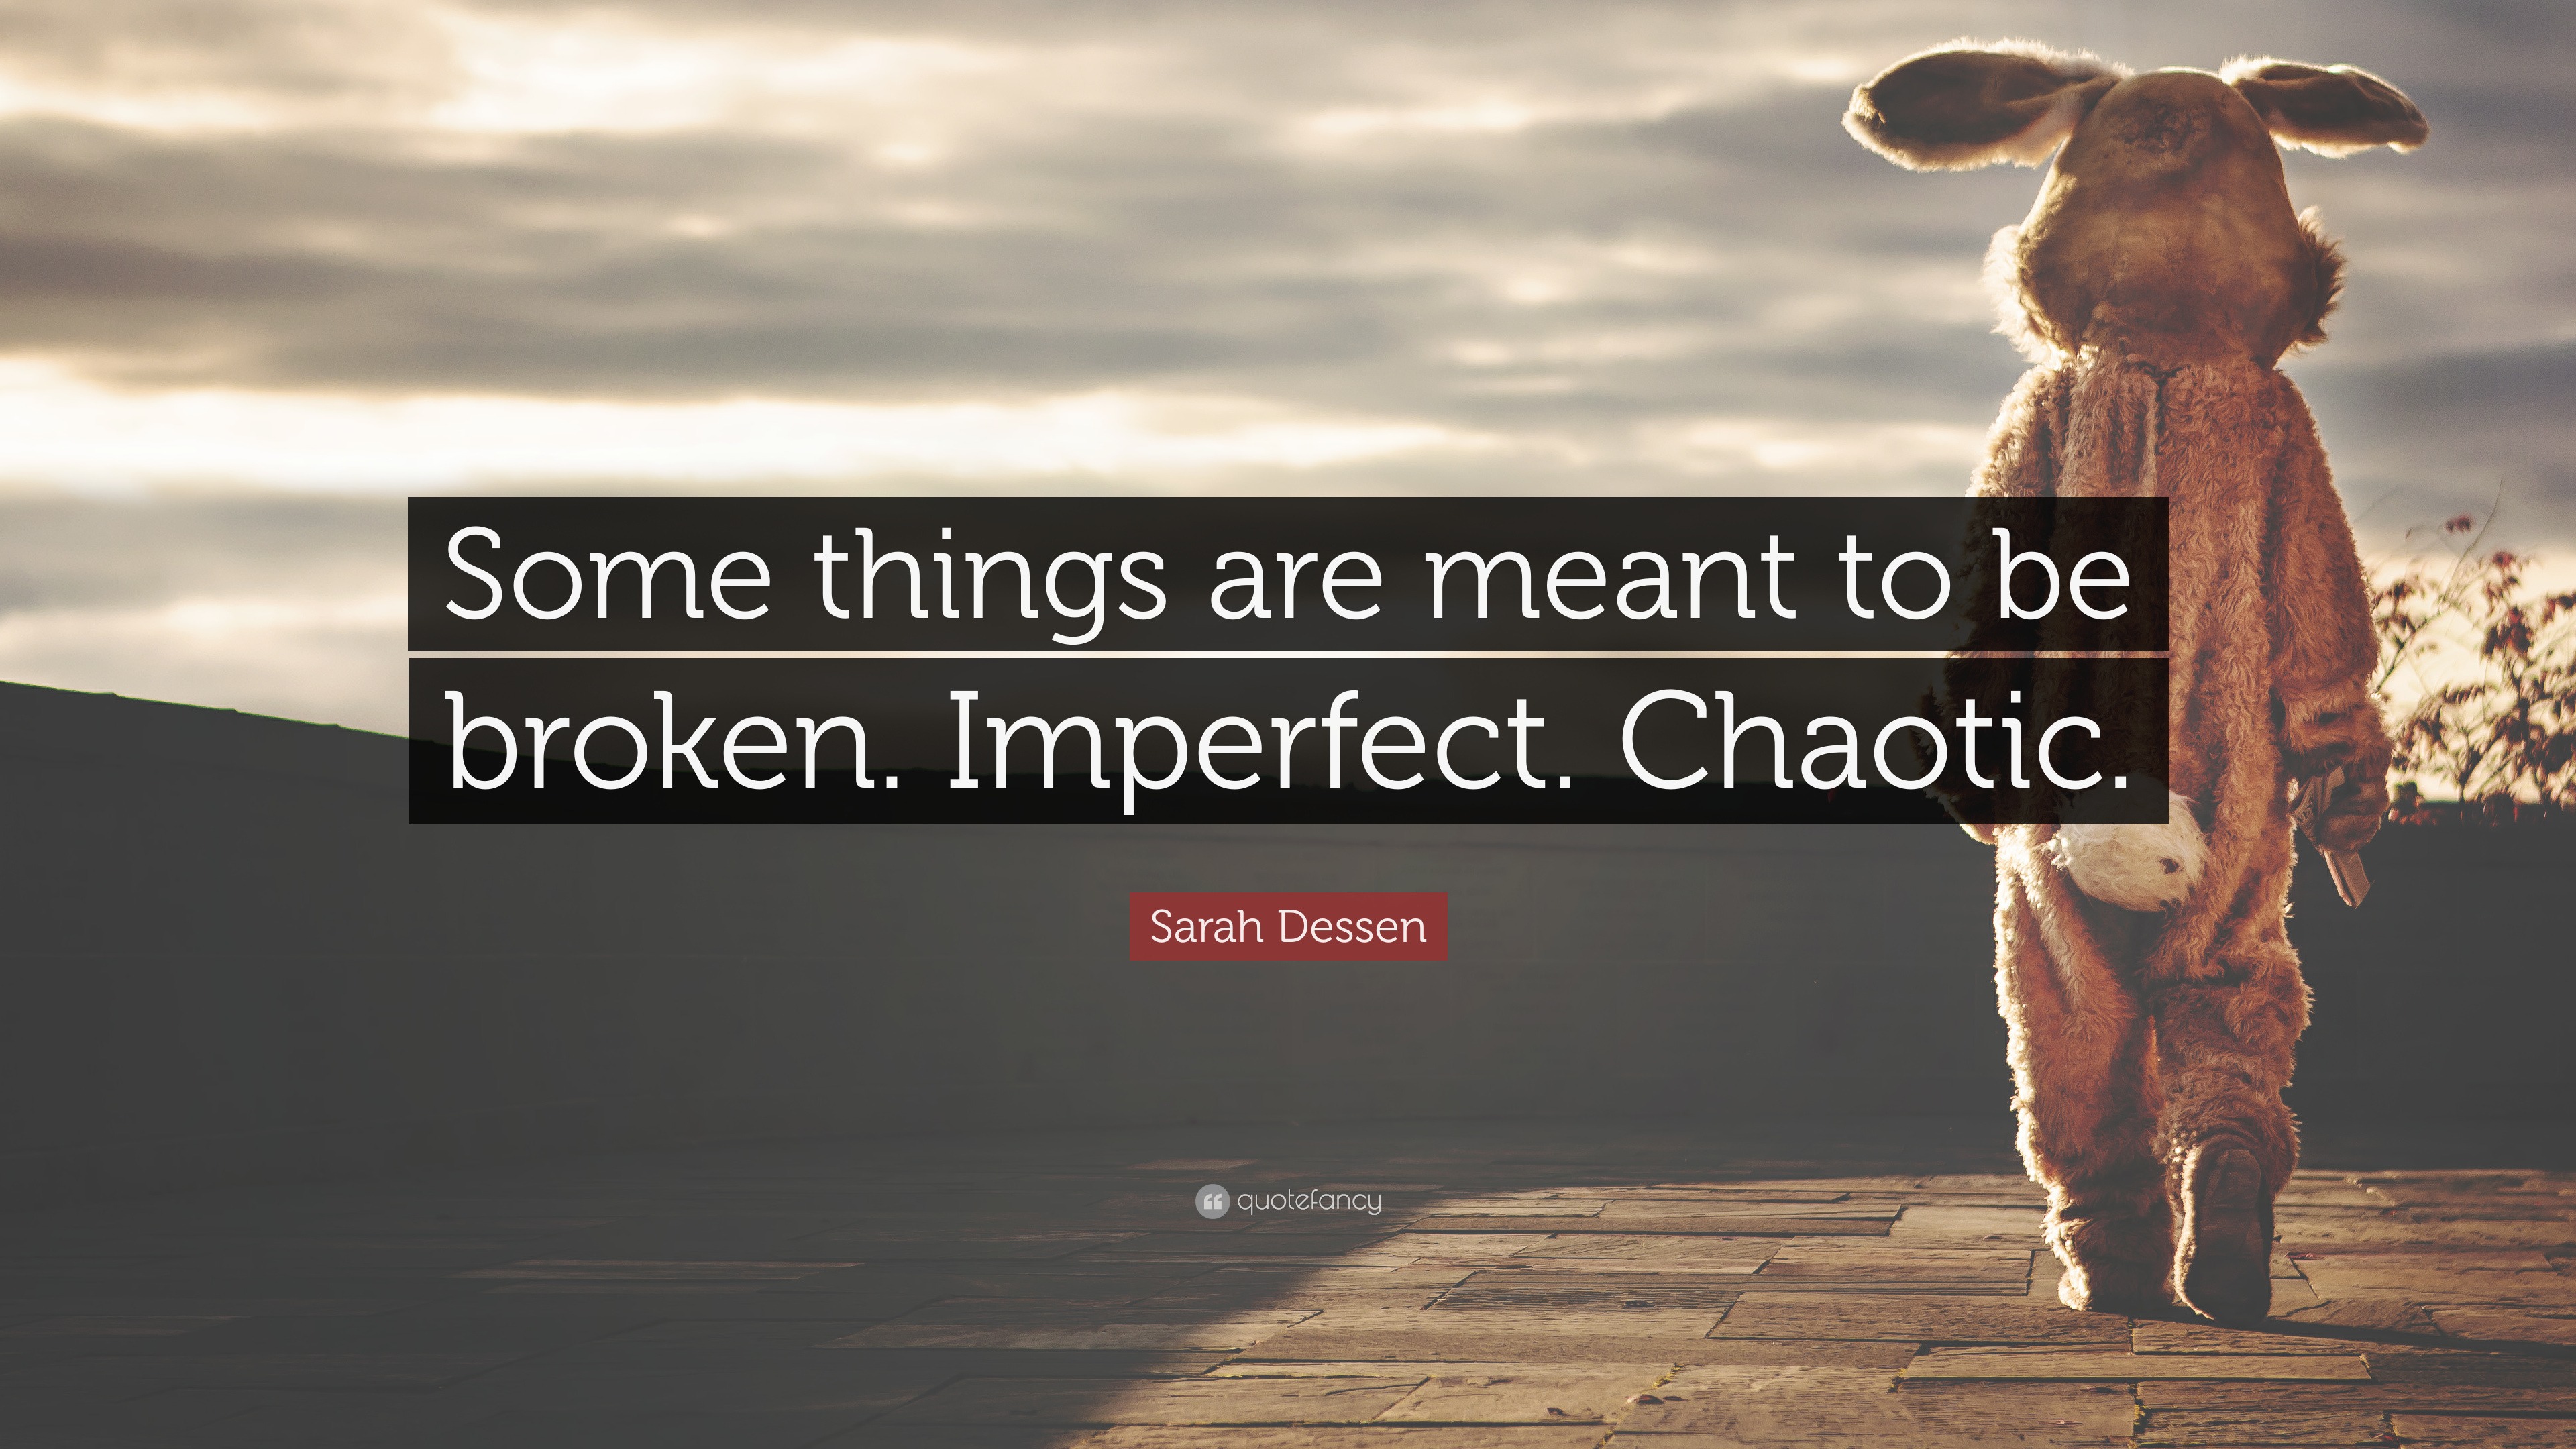 Sarah Dessen Quote “some Things Are Meant To Be Broken Imperfect Chaotic”